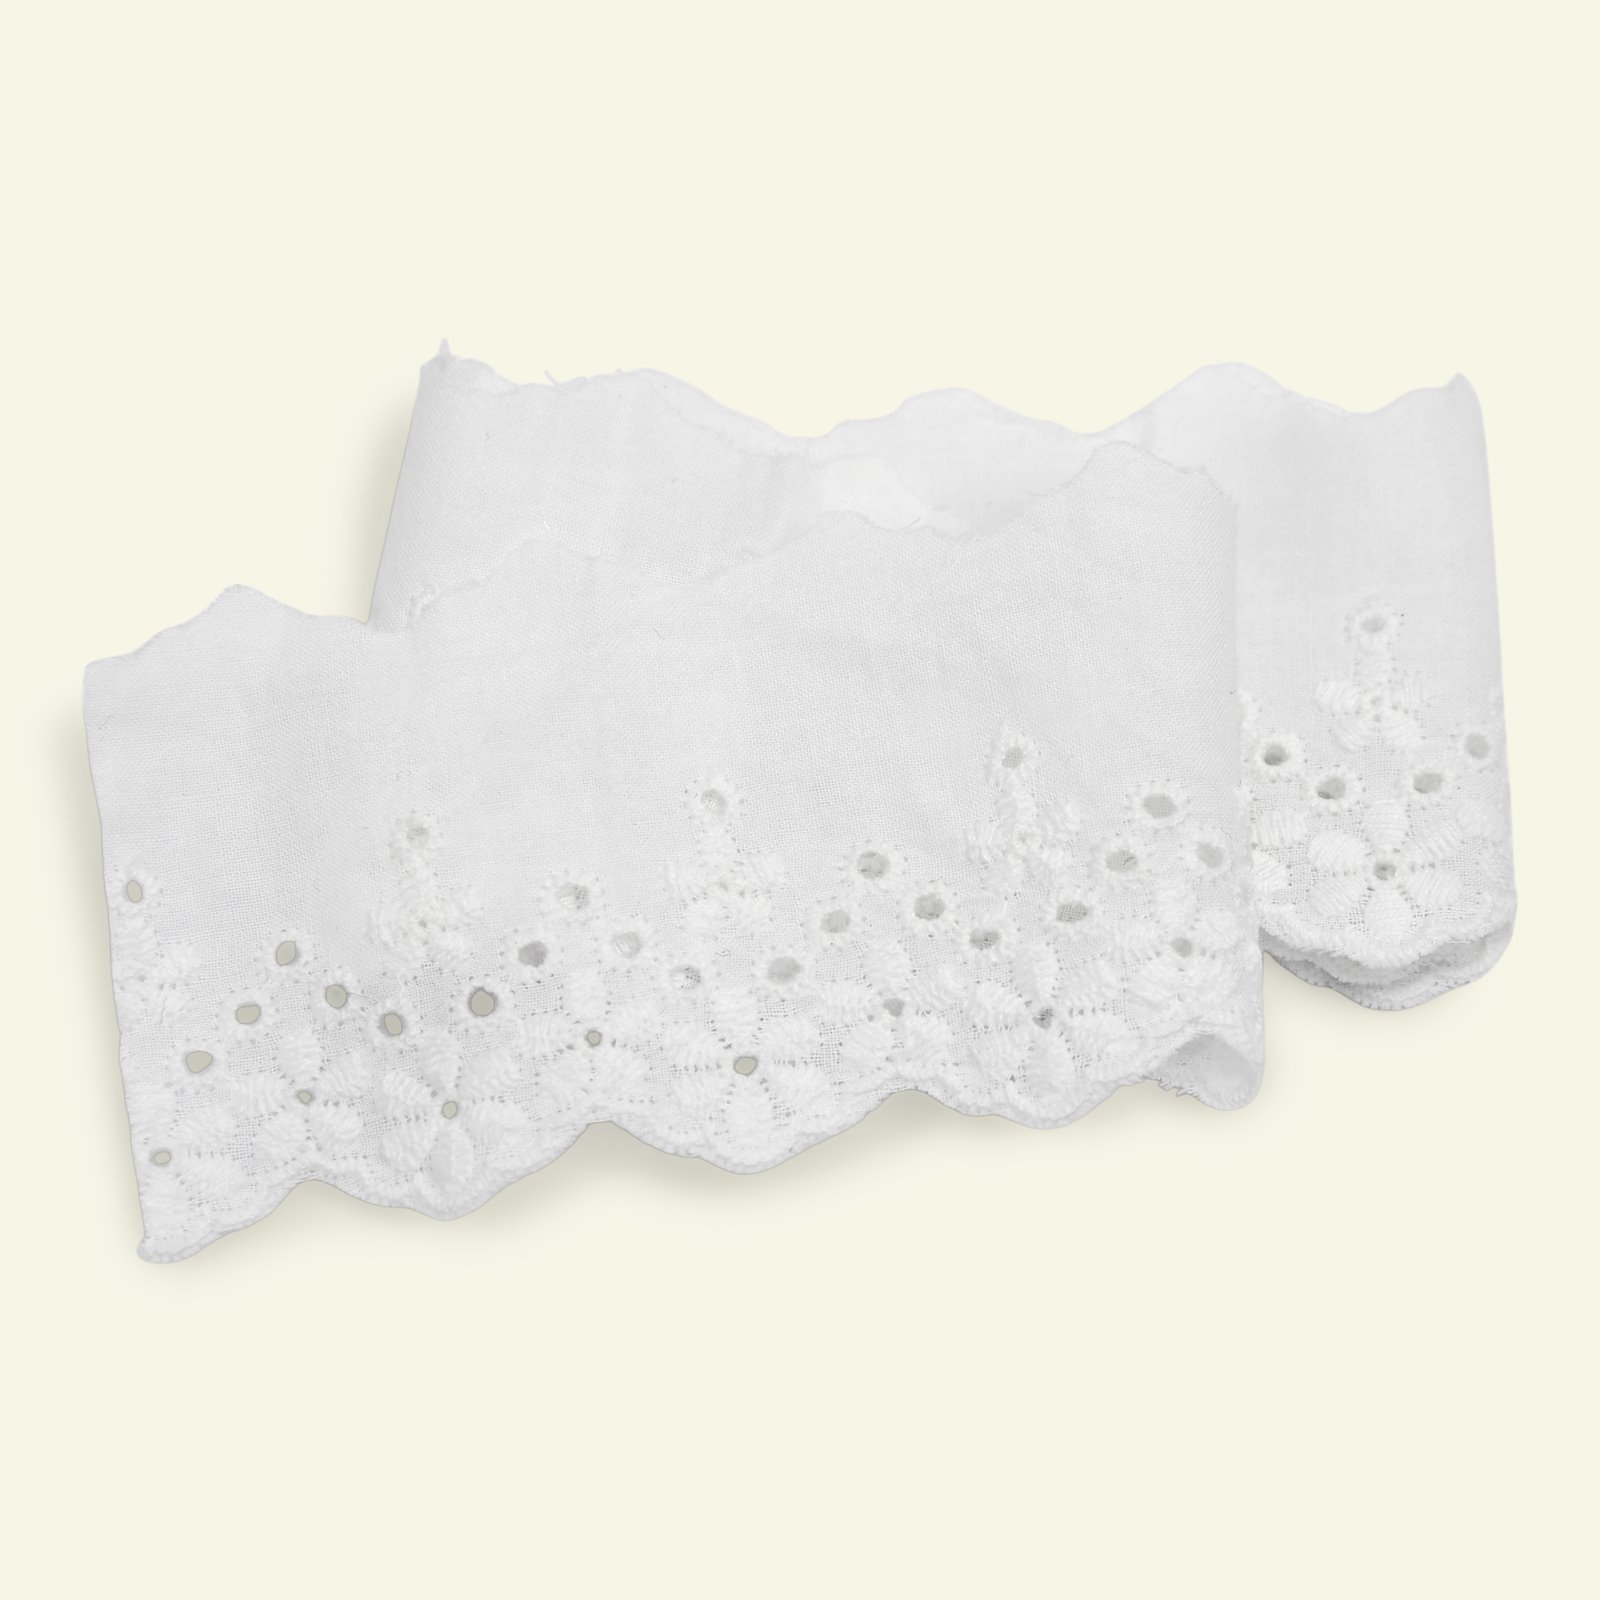 Lace 55mm white 1,5m 22440_pack